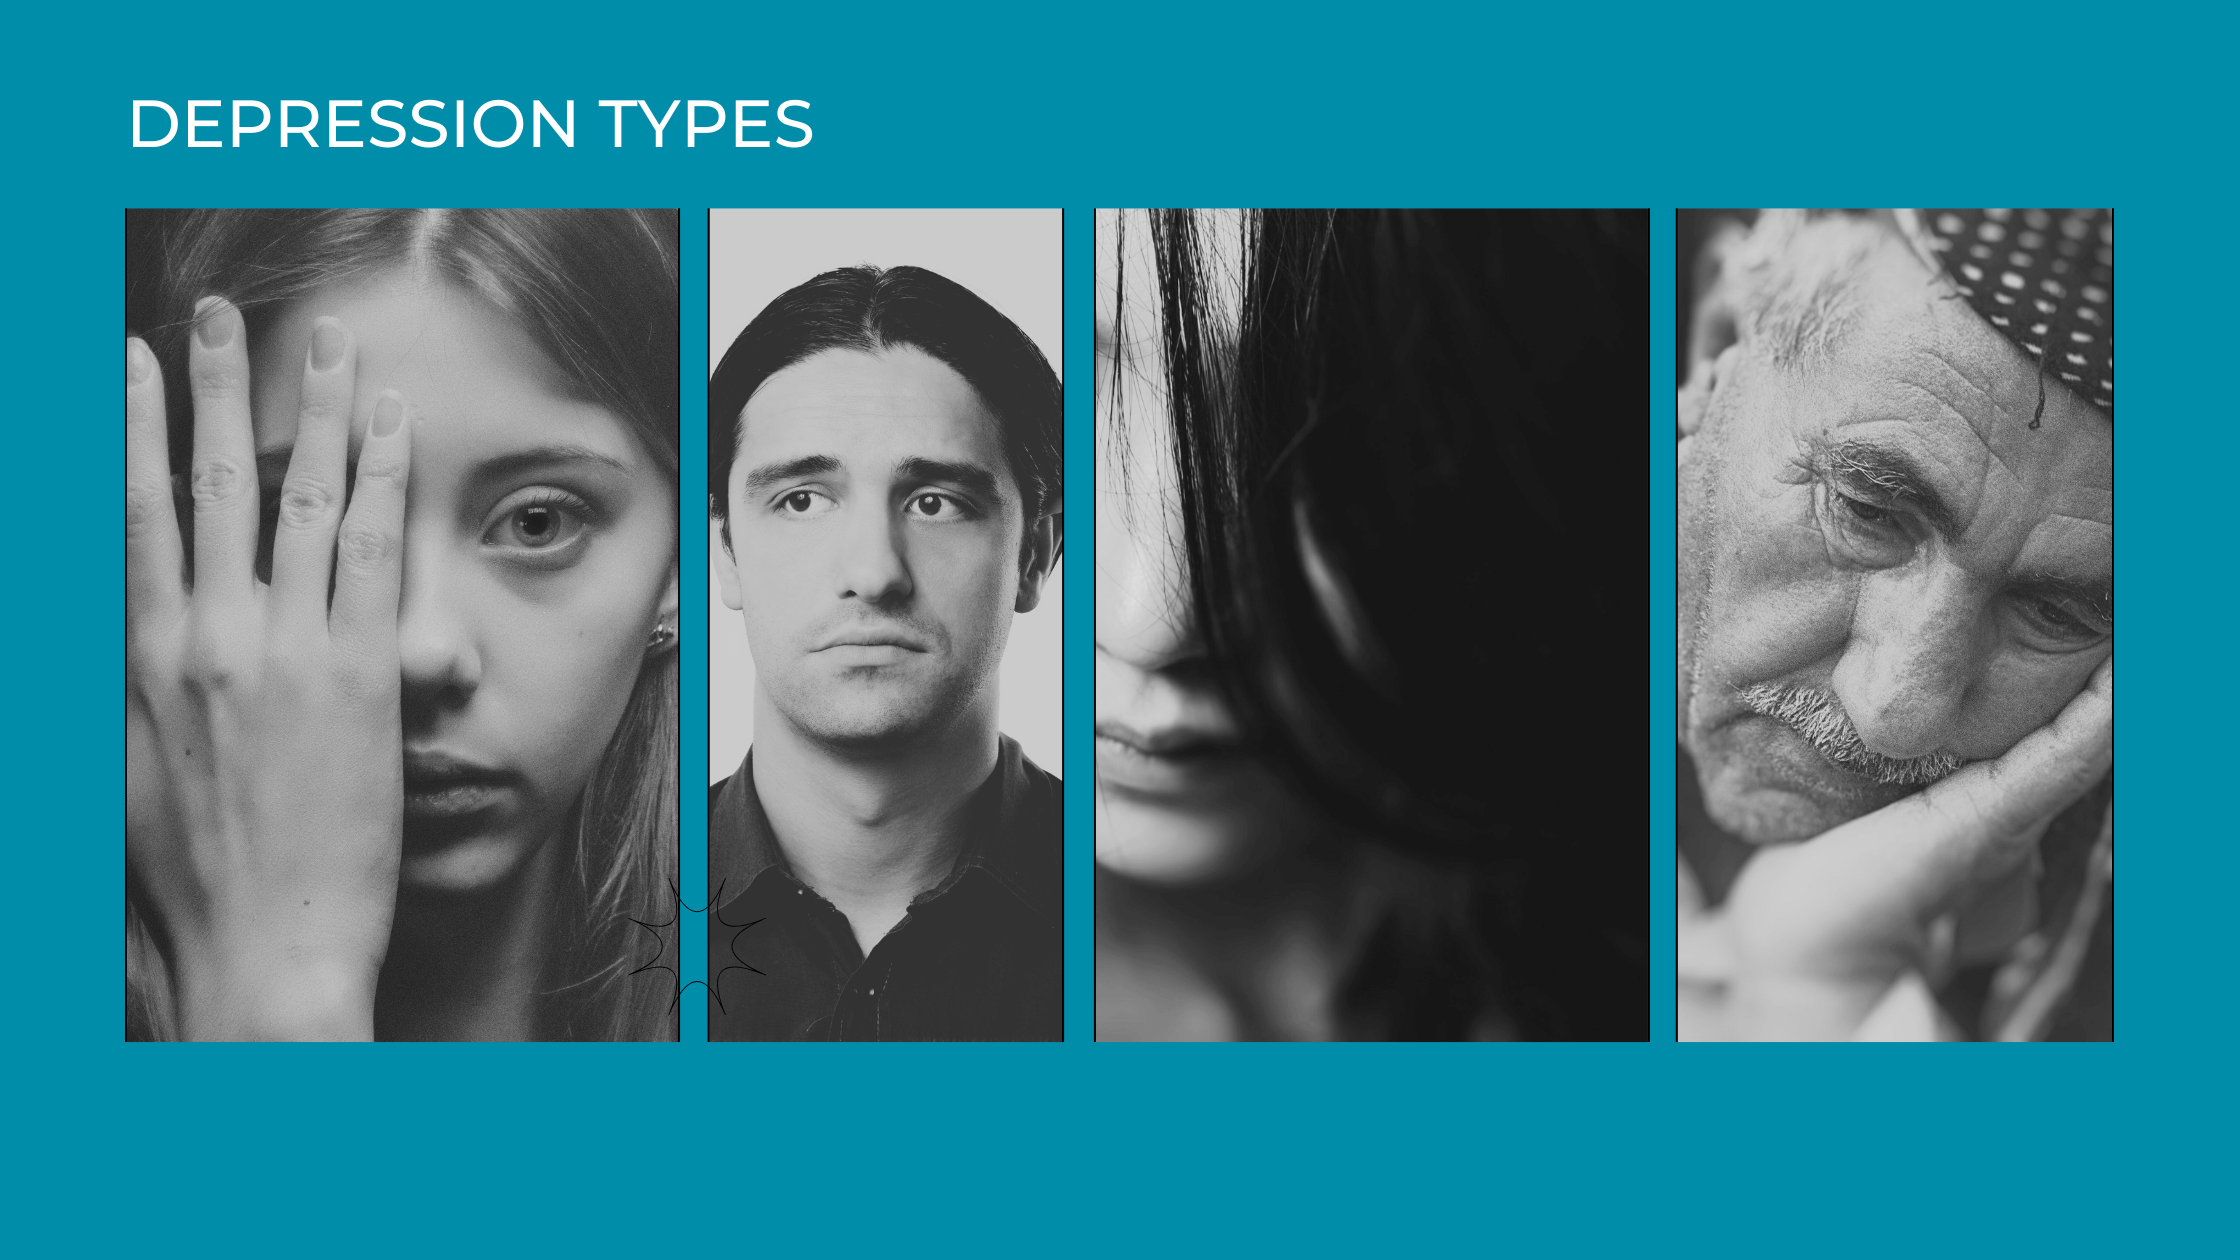 Different depression types may look the same, but require different treatment options.